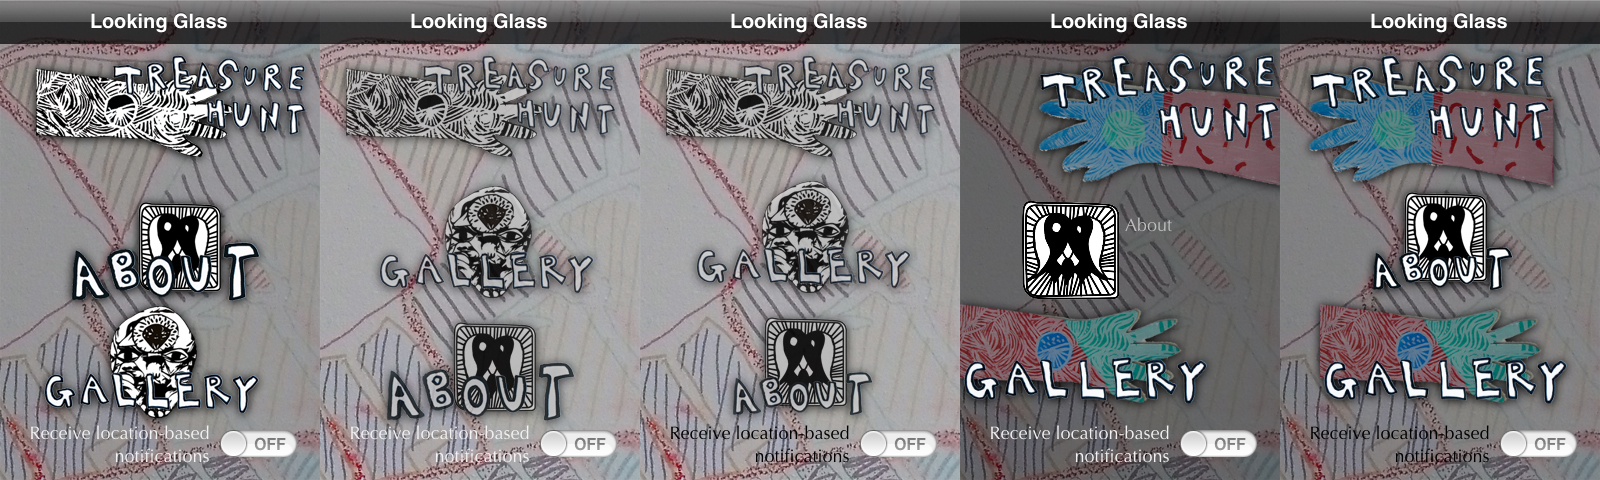 Early home screen
designs